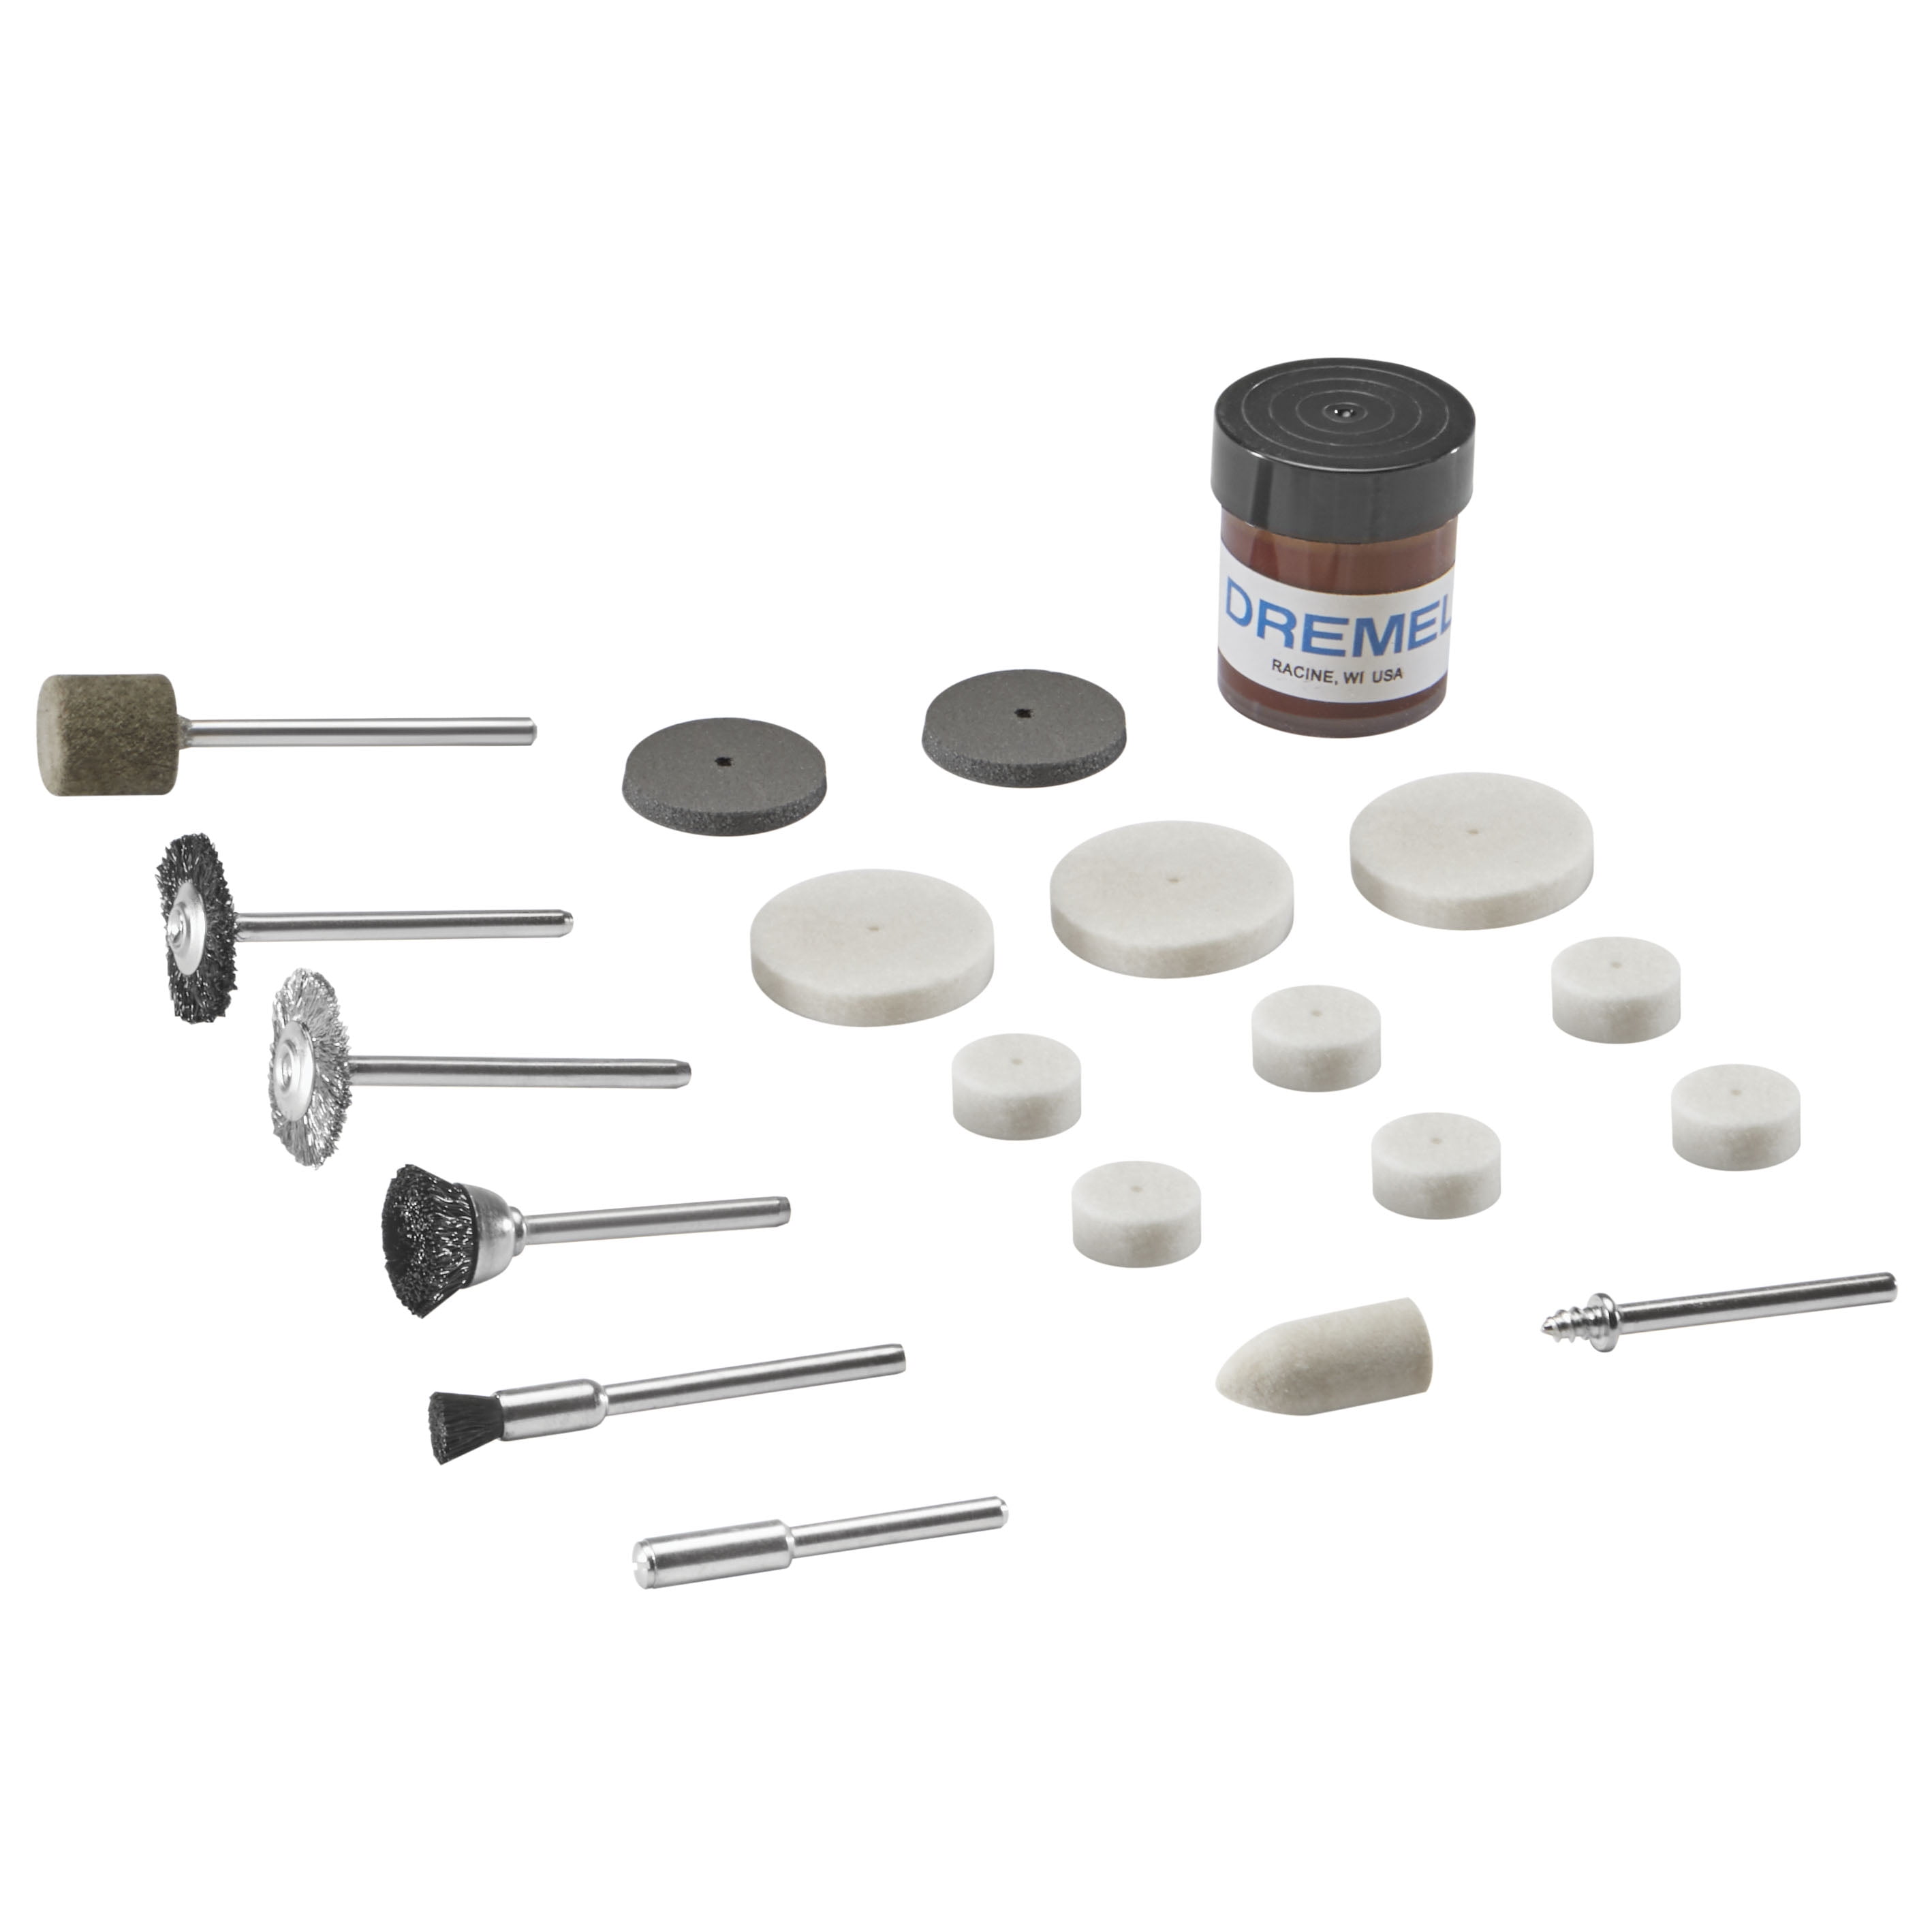 Dremel 726-02 20 PC Rotary Accessory Micro Kit - Includes Buffing Wheels, Polishing Bits, and Compound - Walmart.com